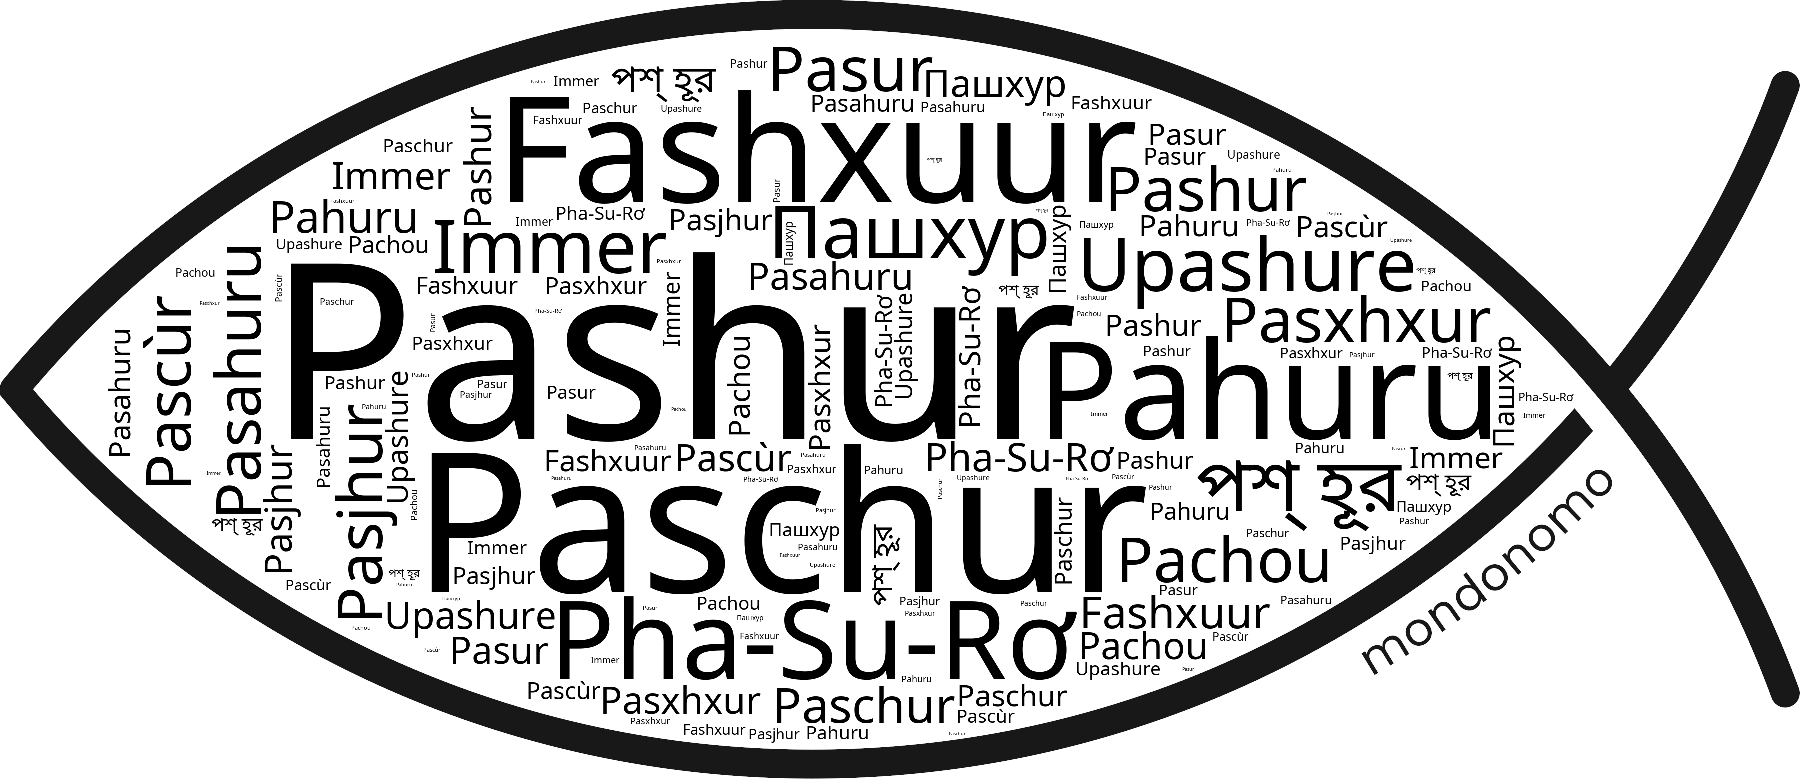 Name Pashur in the world's Bibles